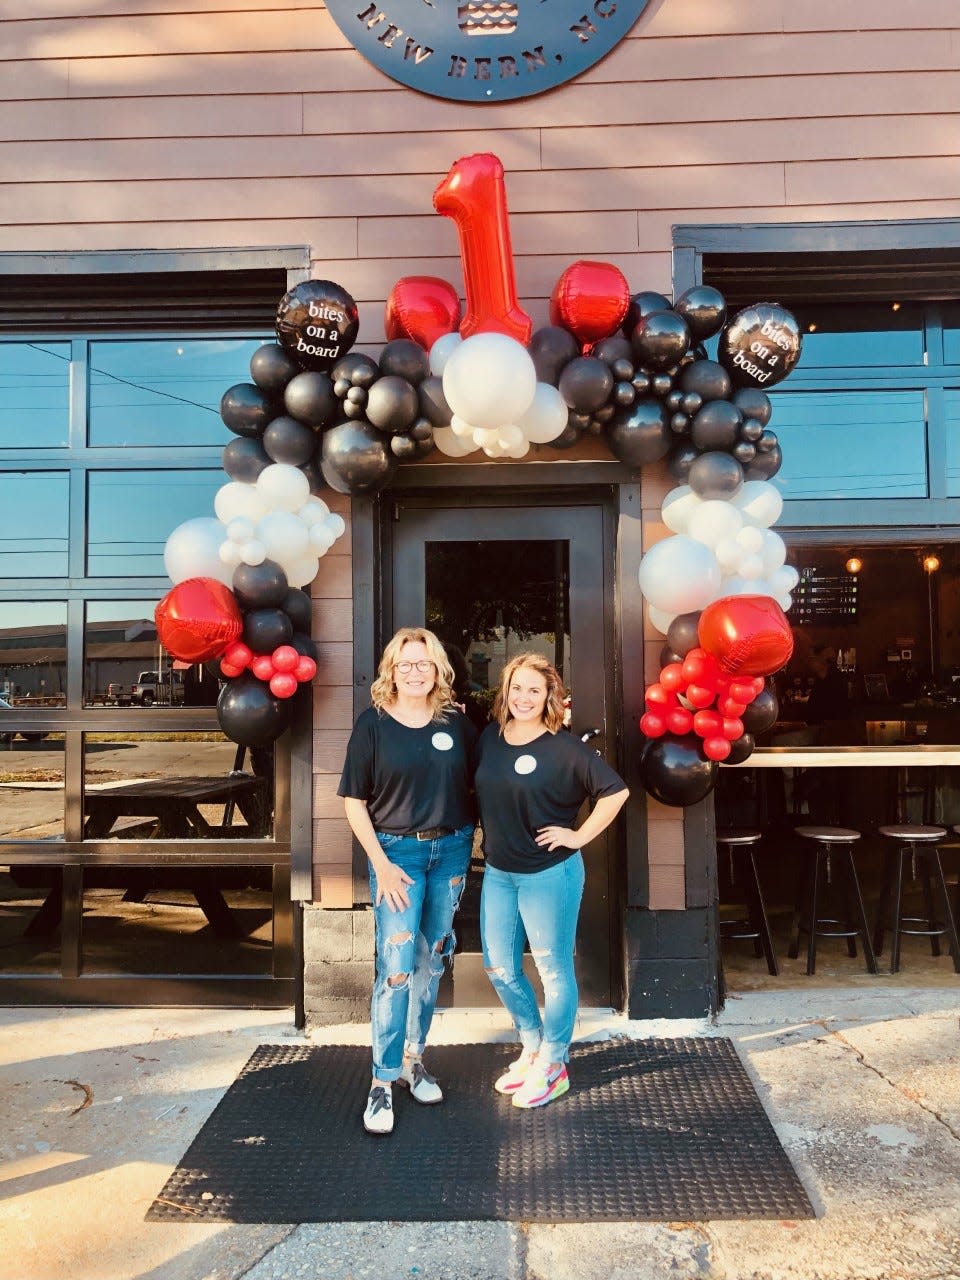 Colleen Iacch and Stacey Rhinehart have opened bites on a board at 2025 S. Glenburnie Road in New Bern.